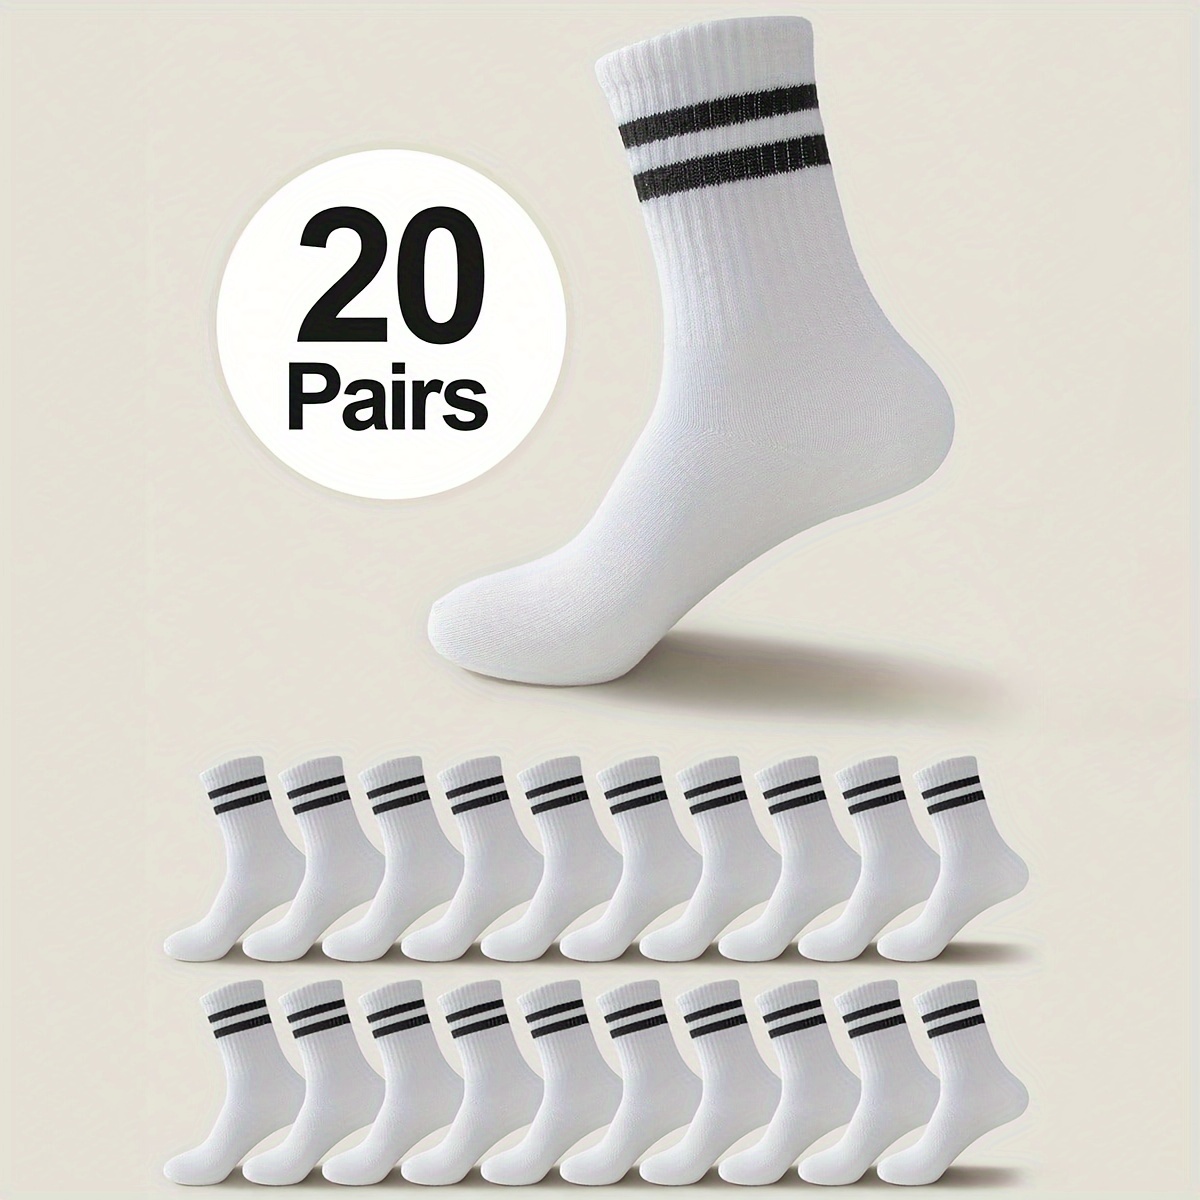 

20 Pairs Of Men's Solid Colour Striped Crew Socks, Comfy Breathable Casual Soft & Elastic Socks, Spring & Summer